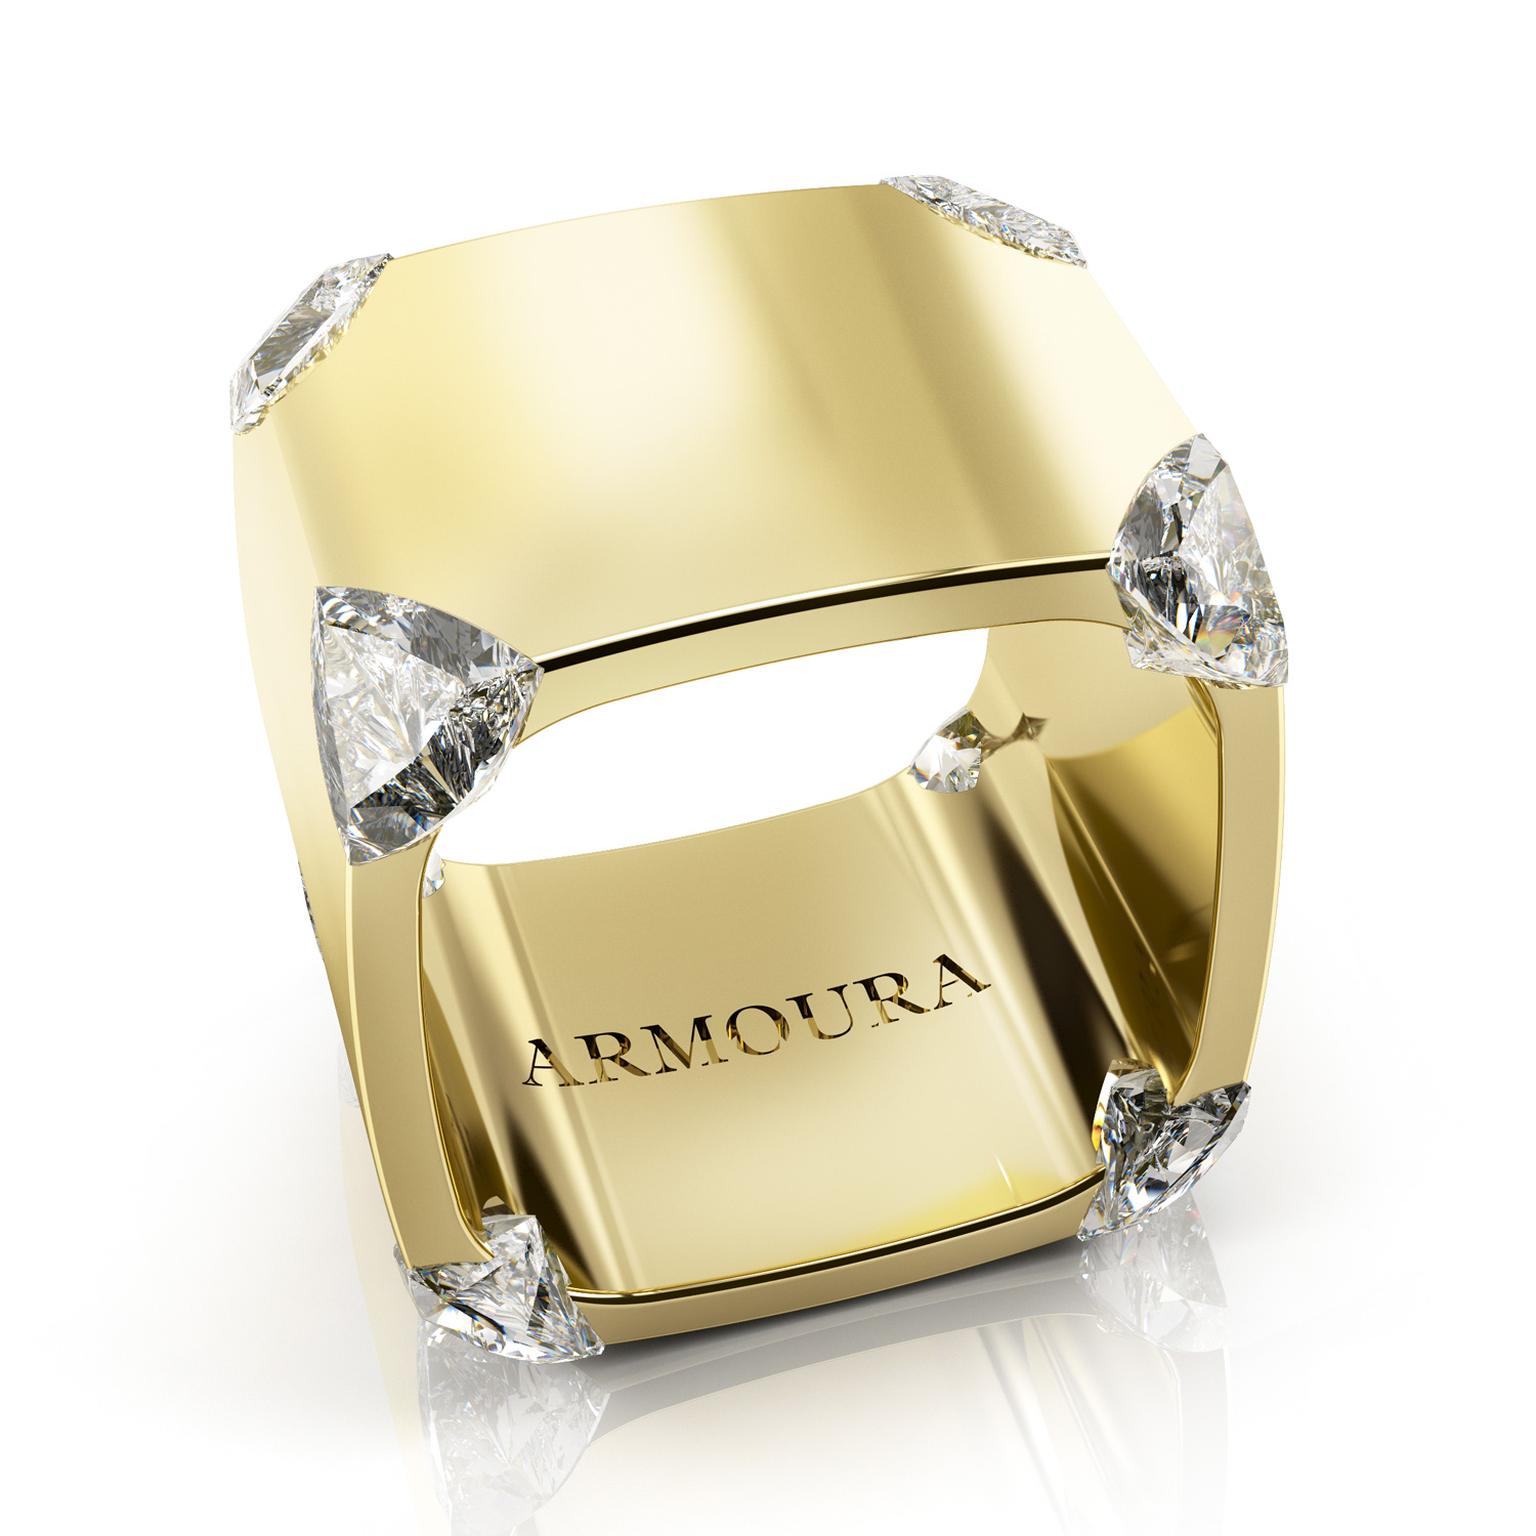 Armoura Trilliant ring in yellow gold with diamonds